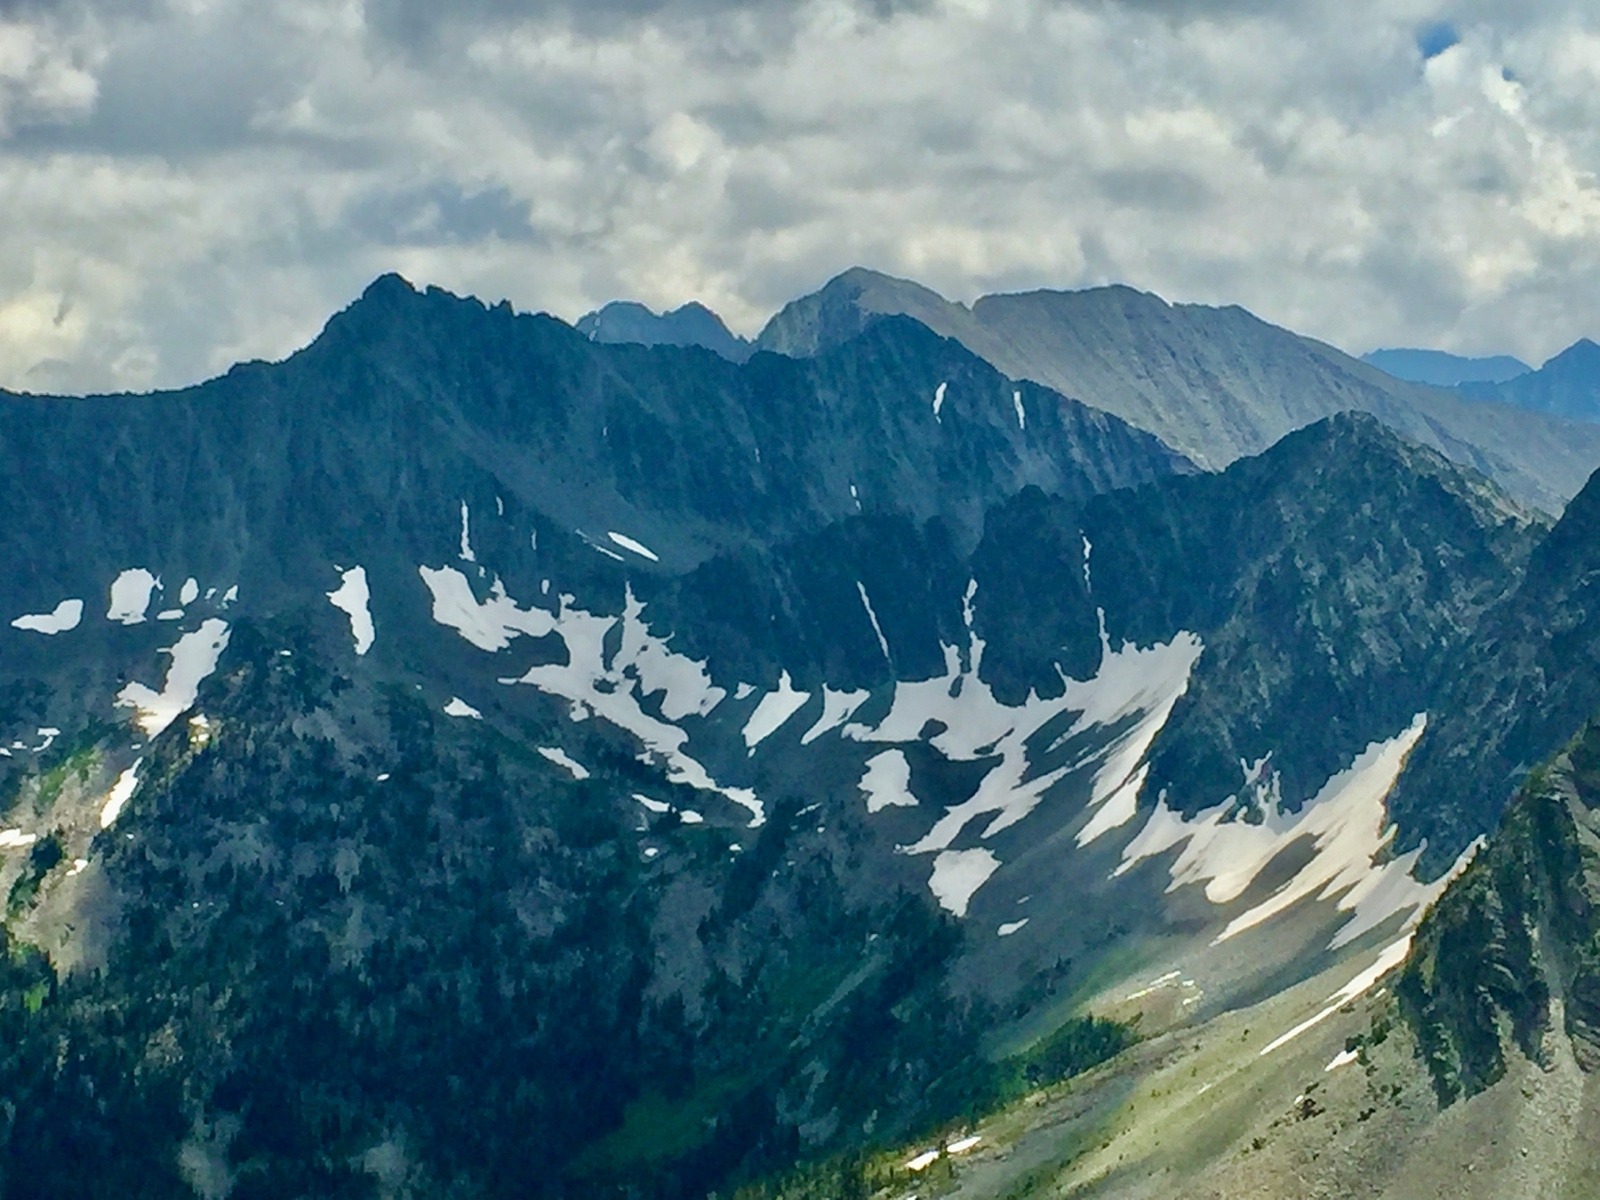 High country in the Crazy Mountains, viewed as holy ground by Crow and home to healthy wildlife populations that have benefitted, in part, from geographic isolation and not a lot of intrusion by large numbers of people. Photo by Todd Wilkinson